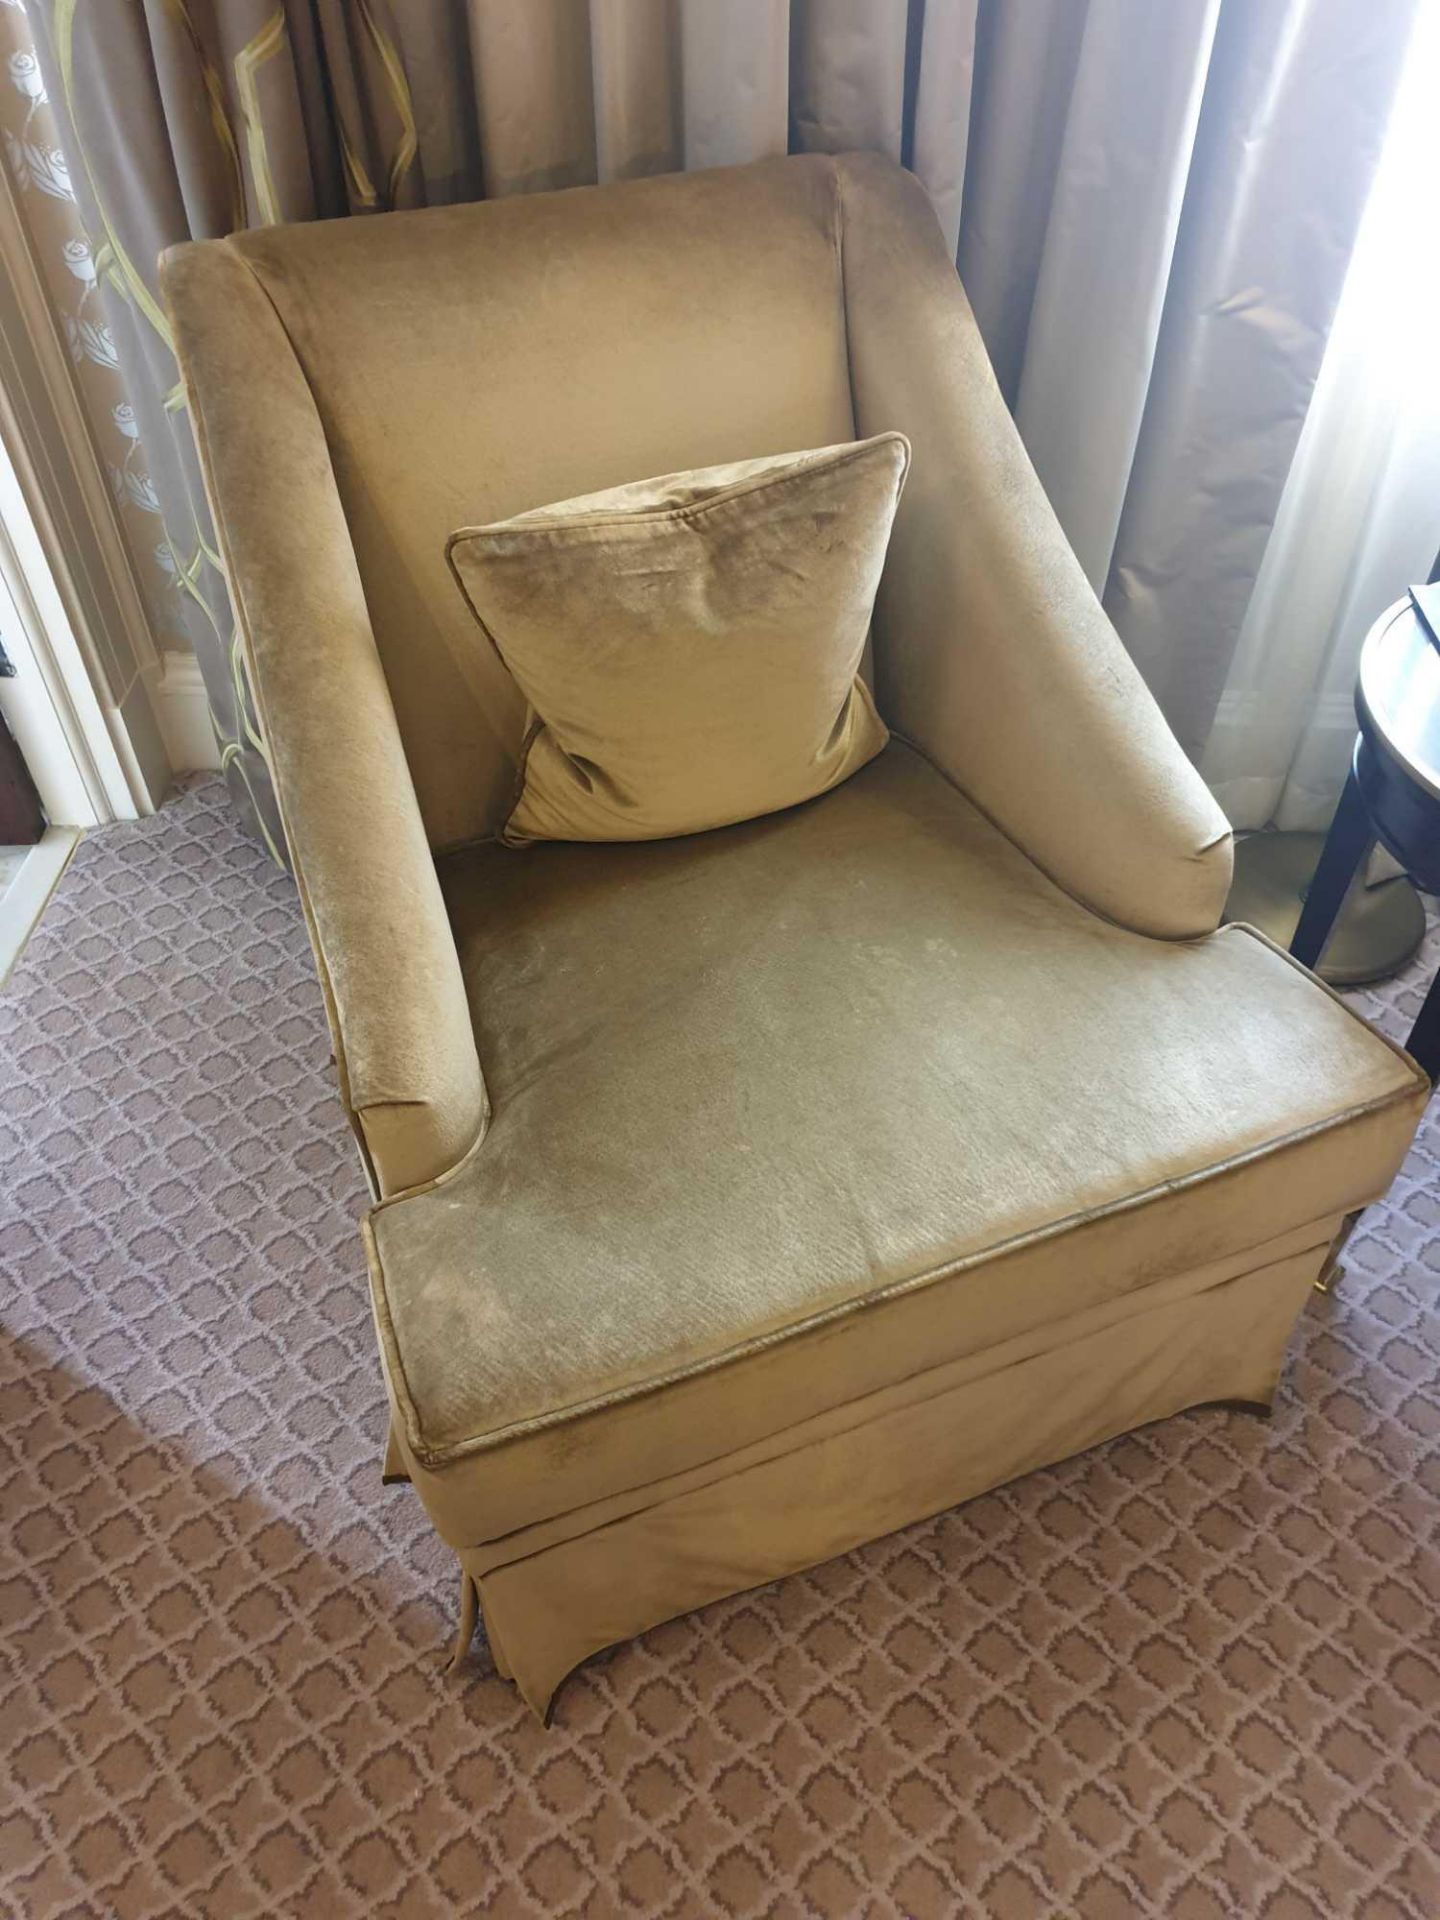 2 x Egerton Armchair Sloping Arms Dressmakers Skirt And A Sprung Back Upholstered Relaxer Chair 70 x